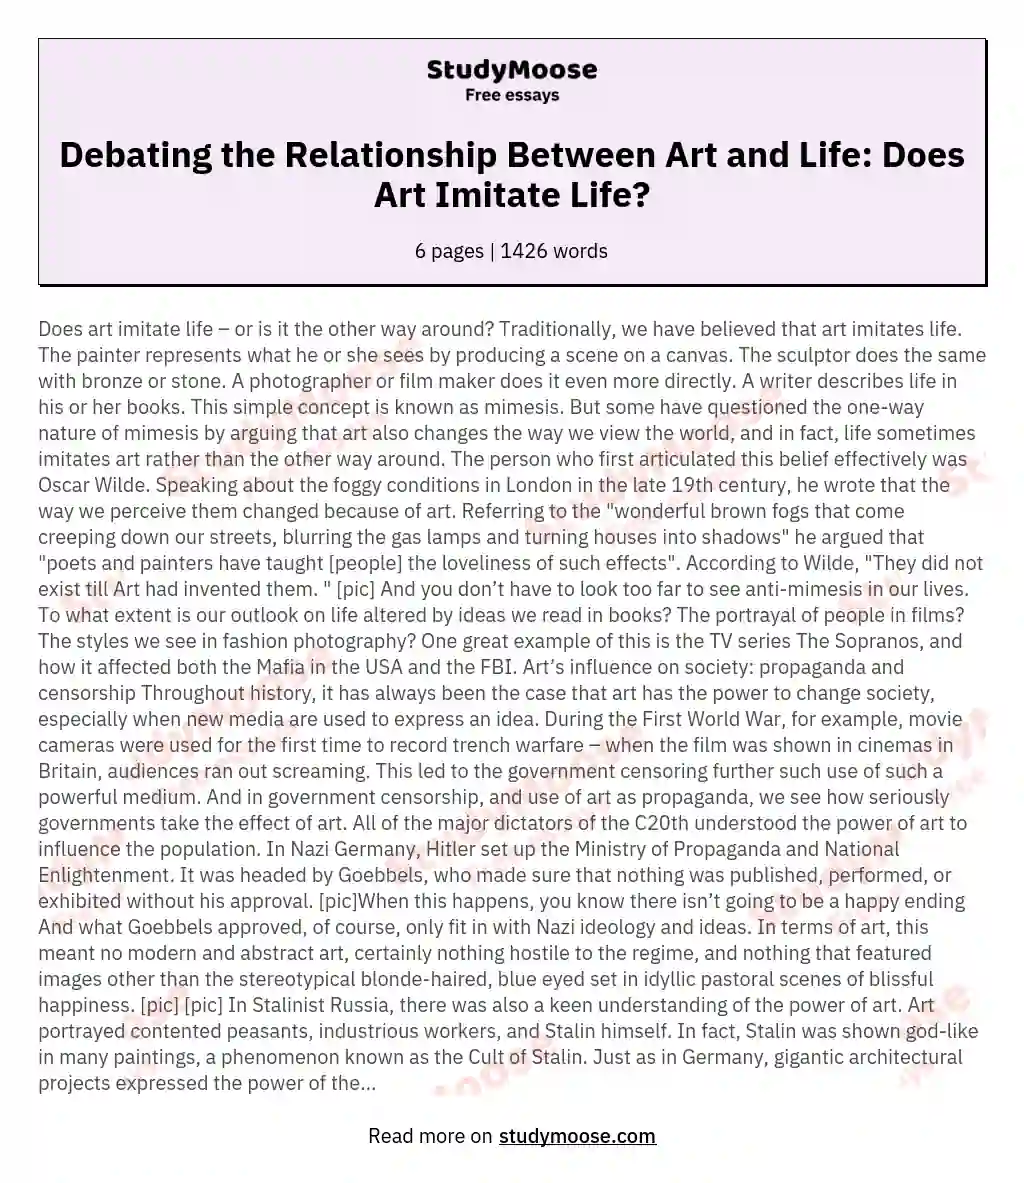 Debating the Relationship Between Art and Life: Does Art Imitate Life? essay